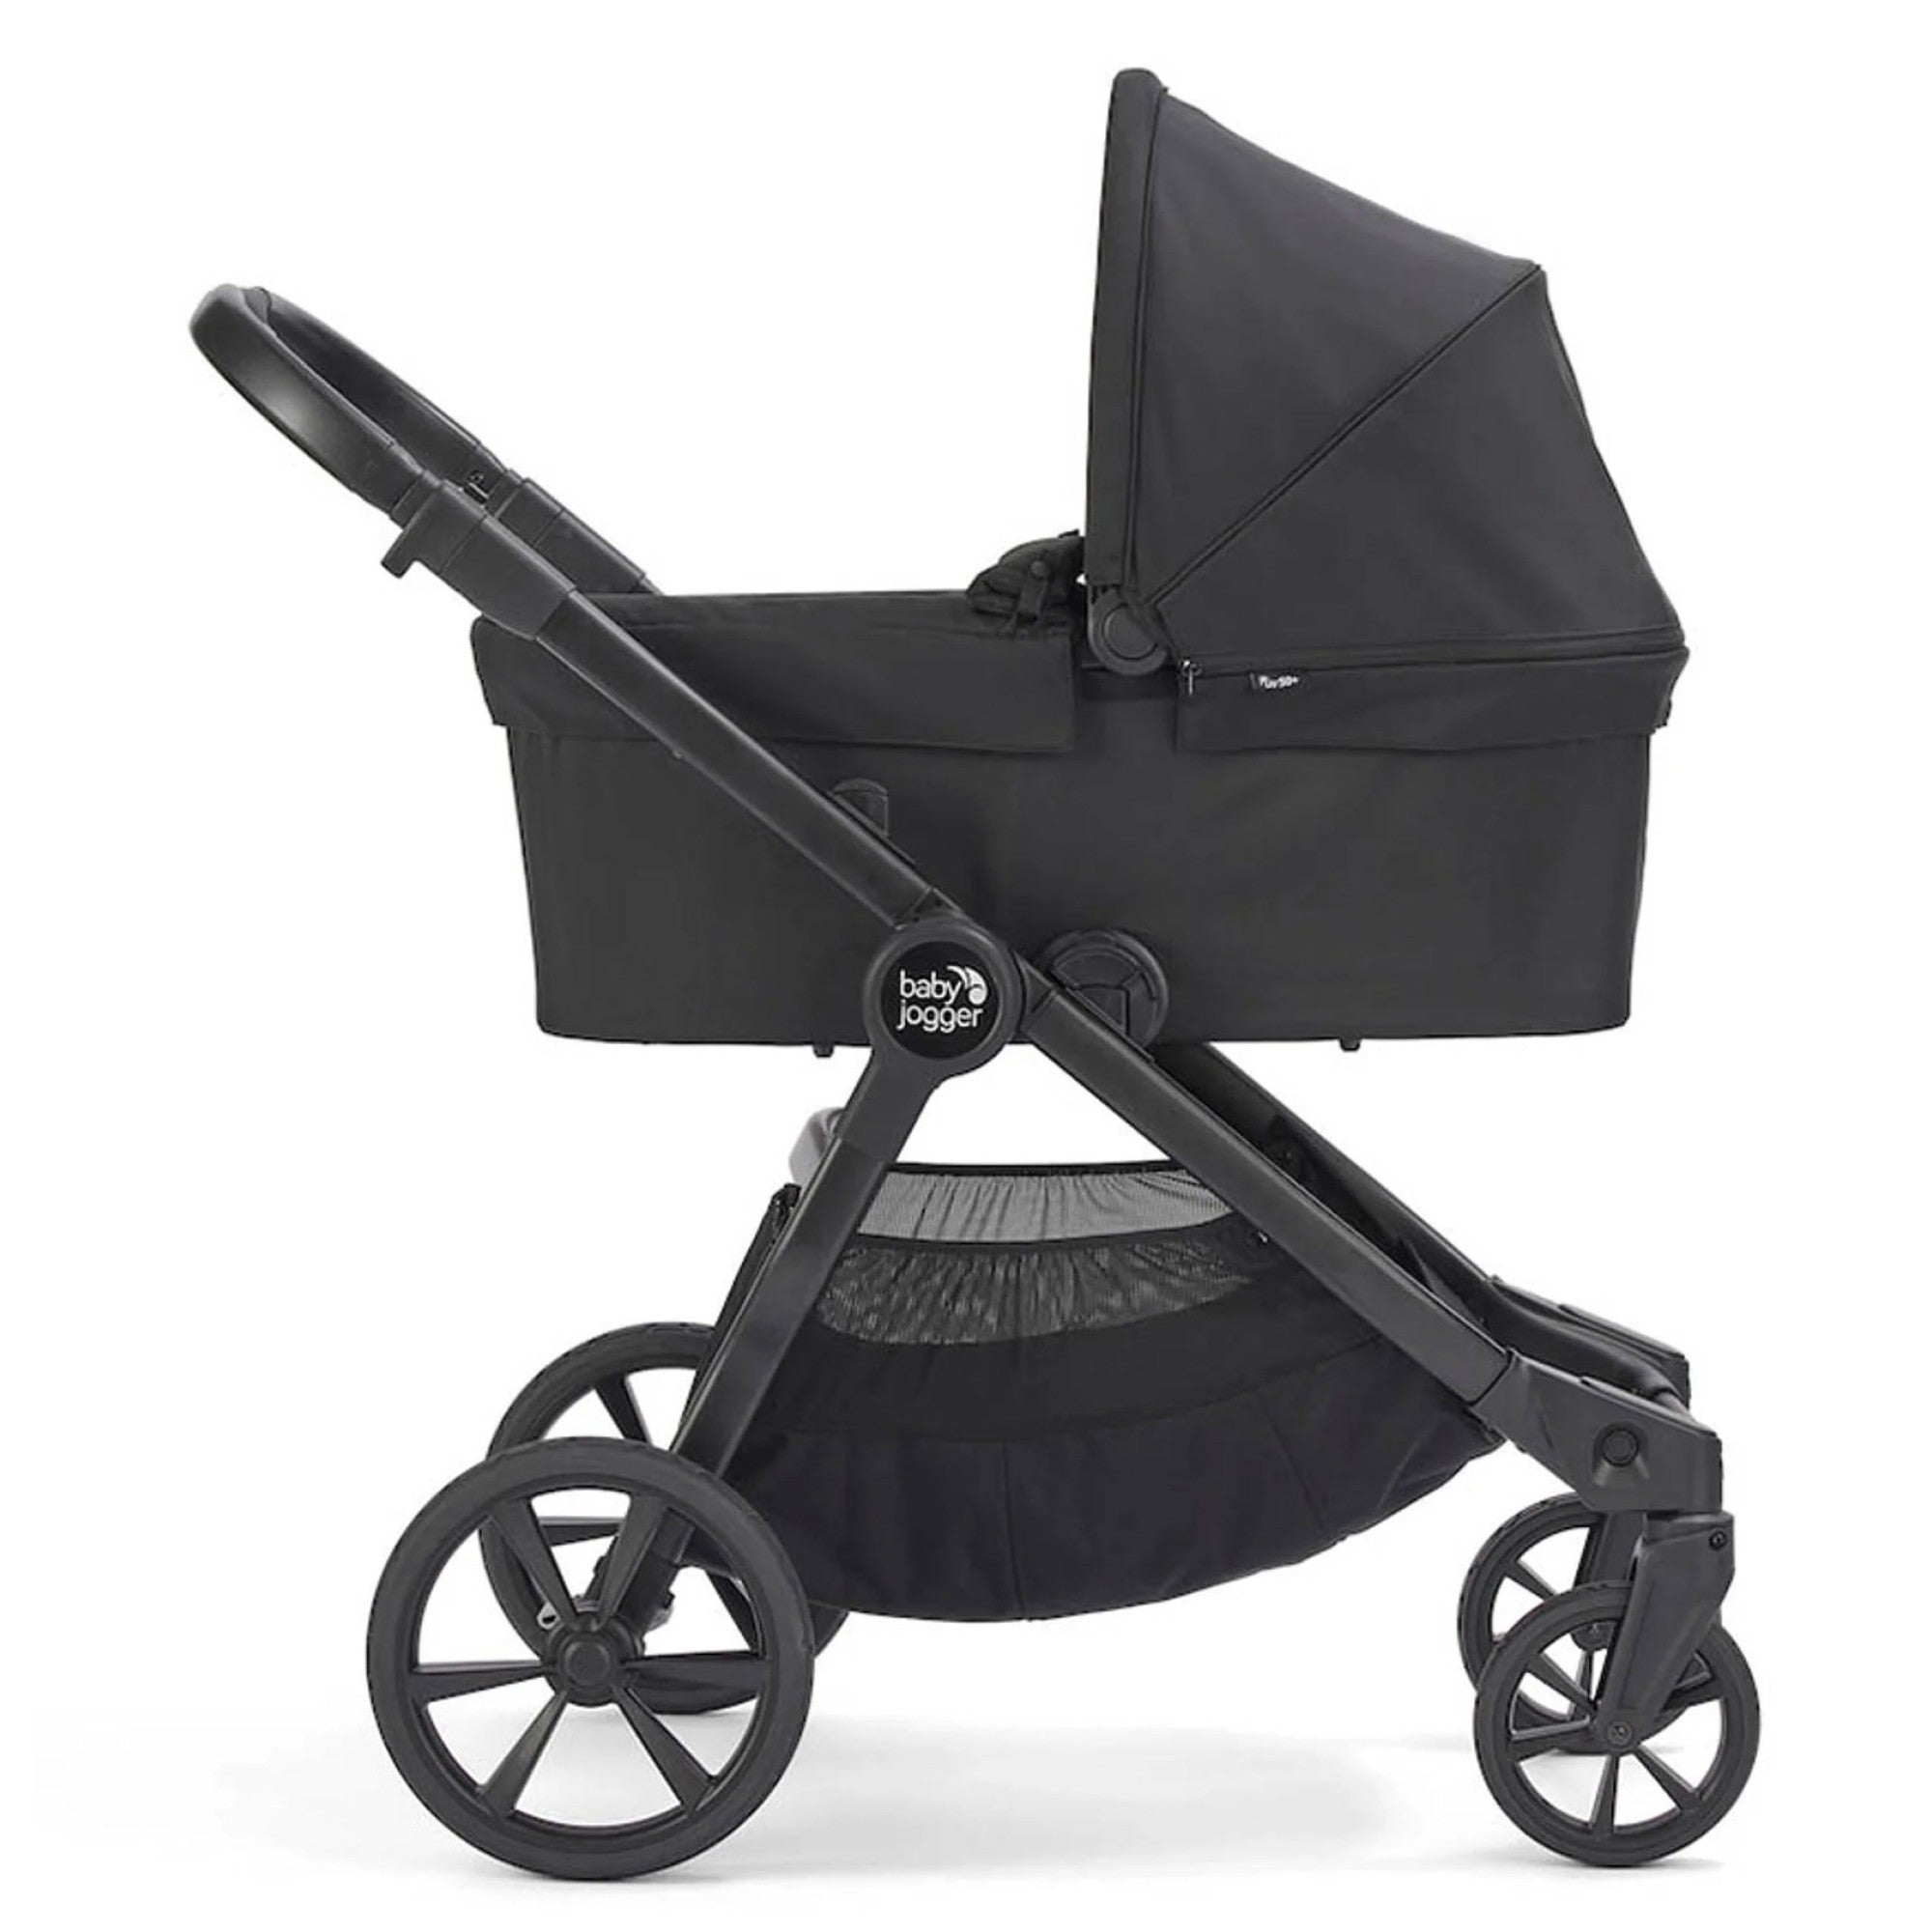 Baby jogger: gondola for Deluxe trolley